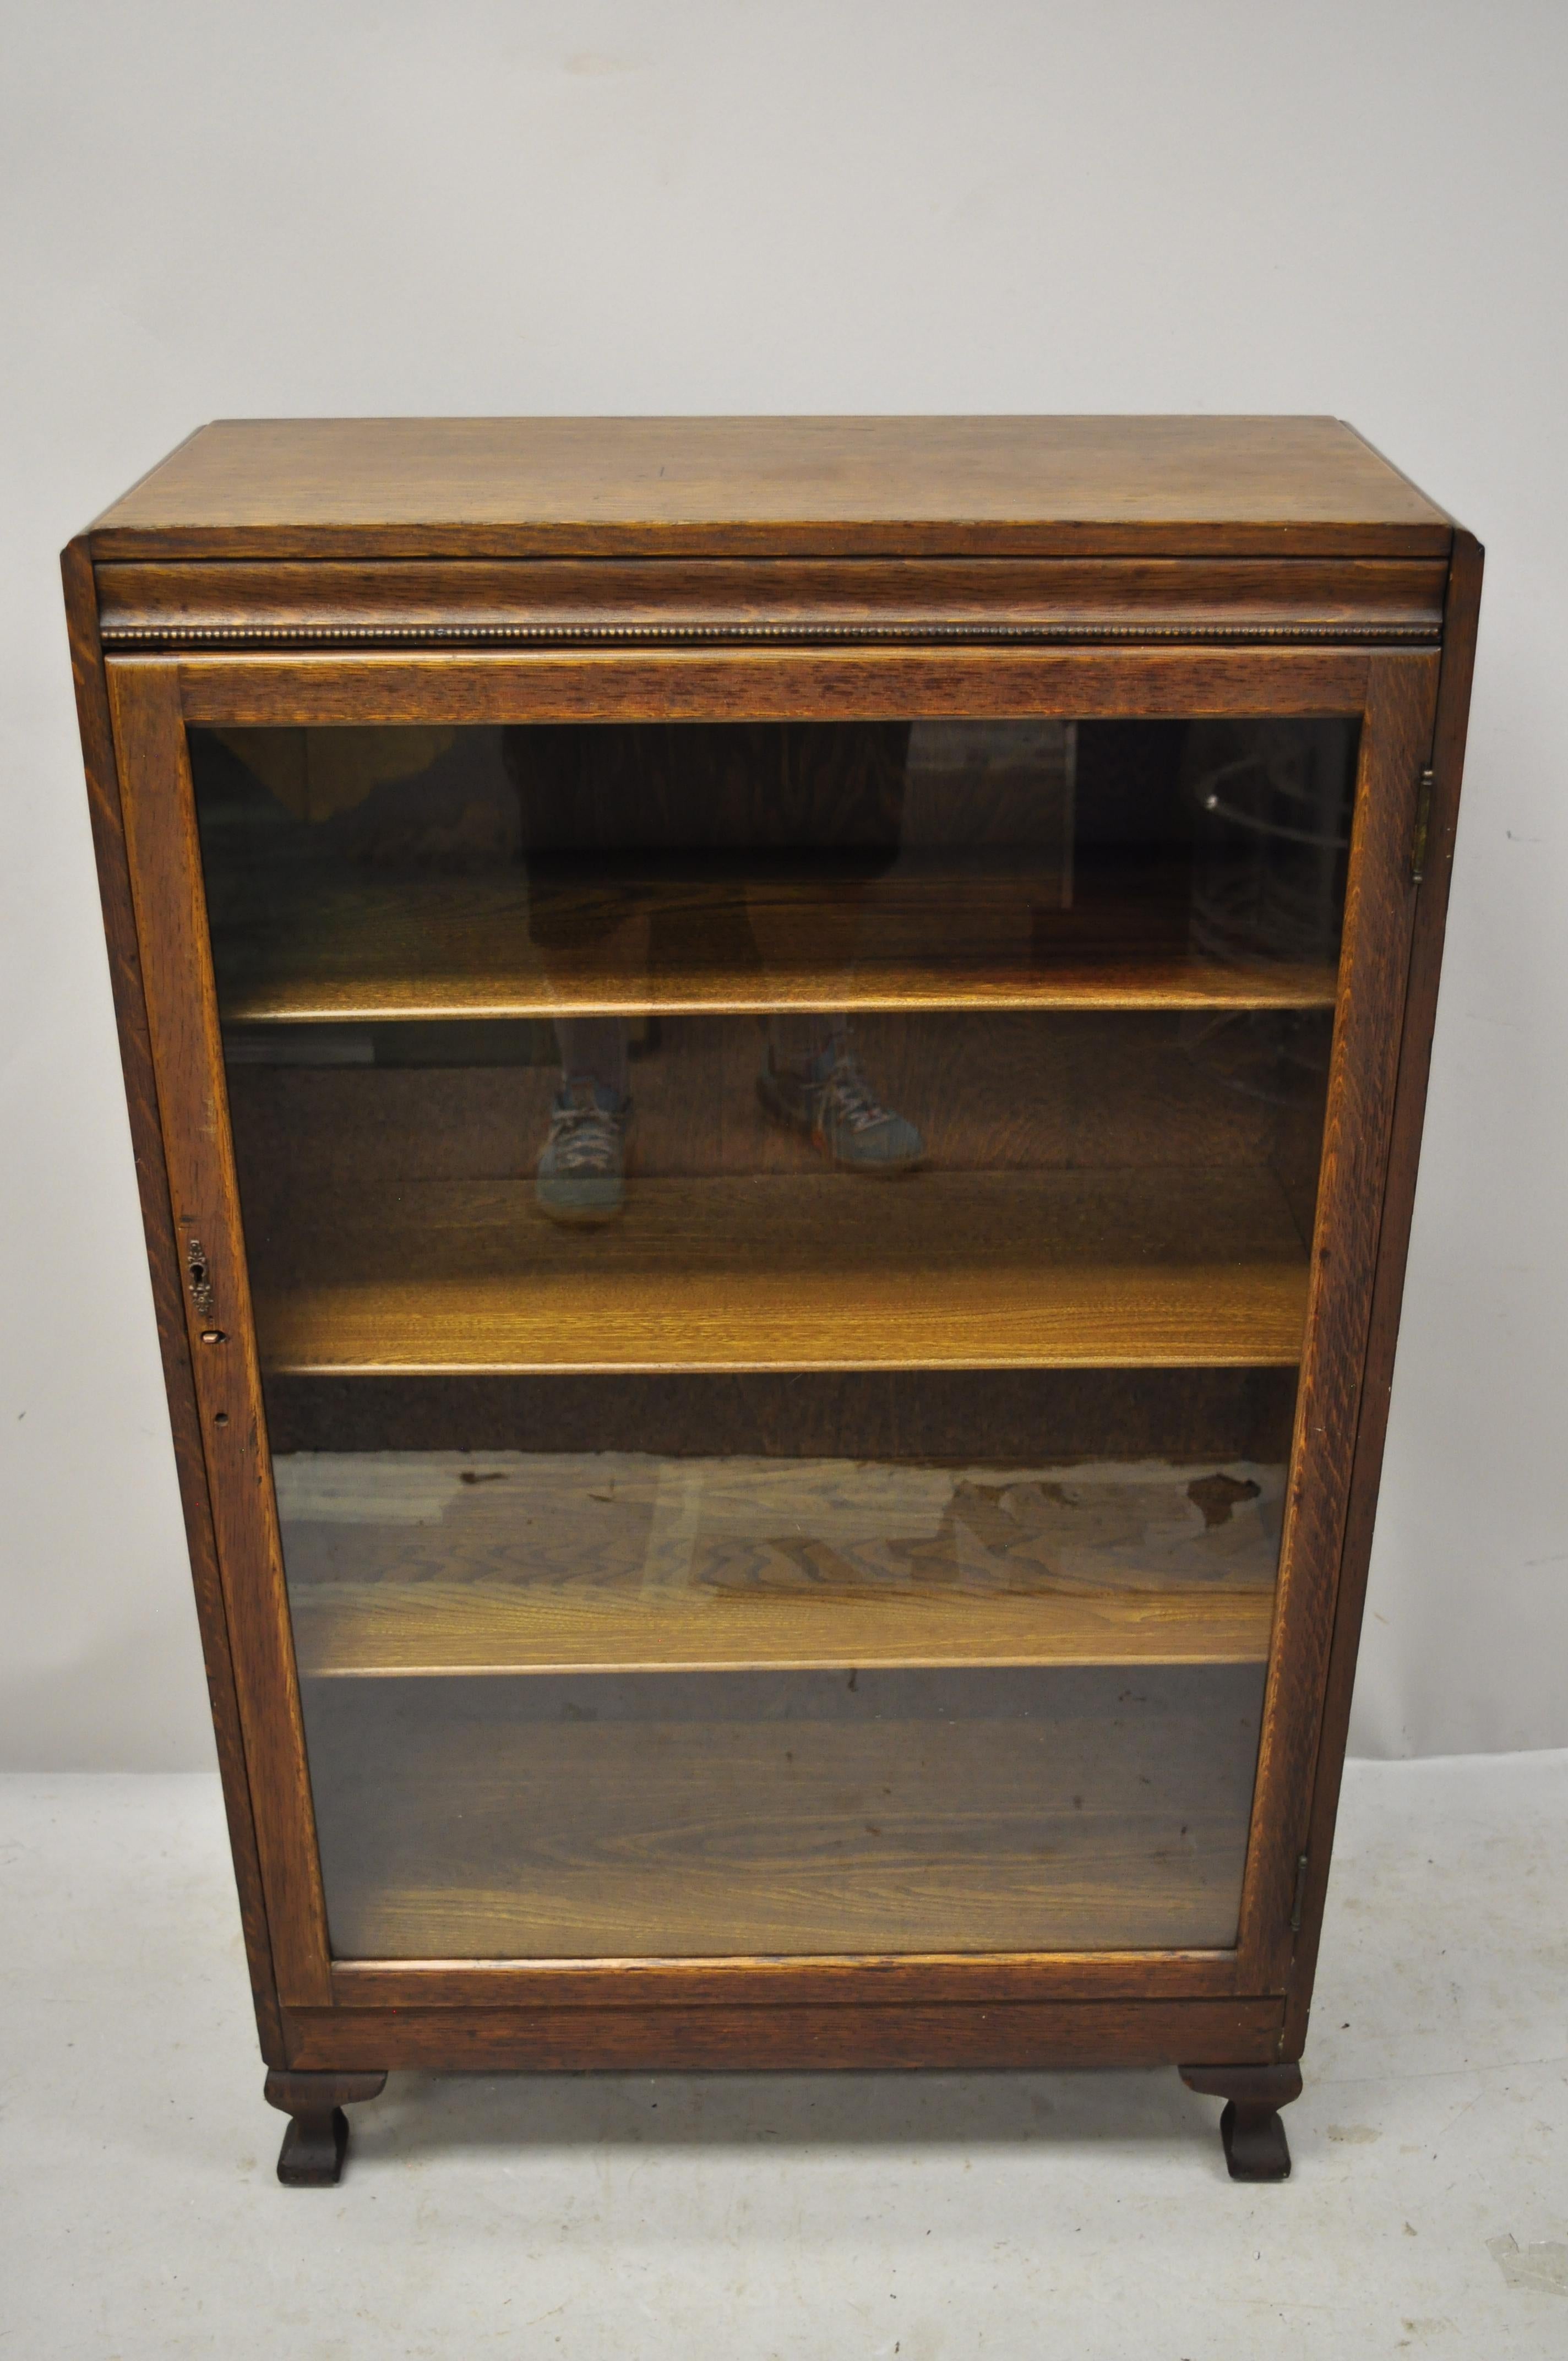 Mission Arts & Crafts Oakwood Single Glass Door Small Bookcase Display Cabinet 1